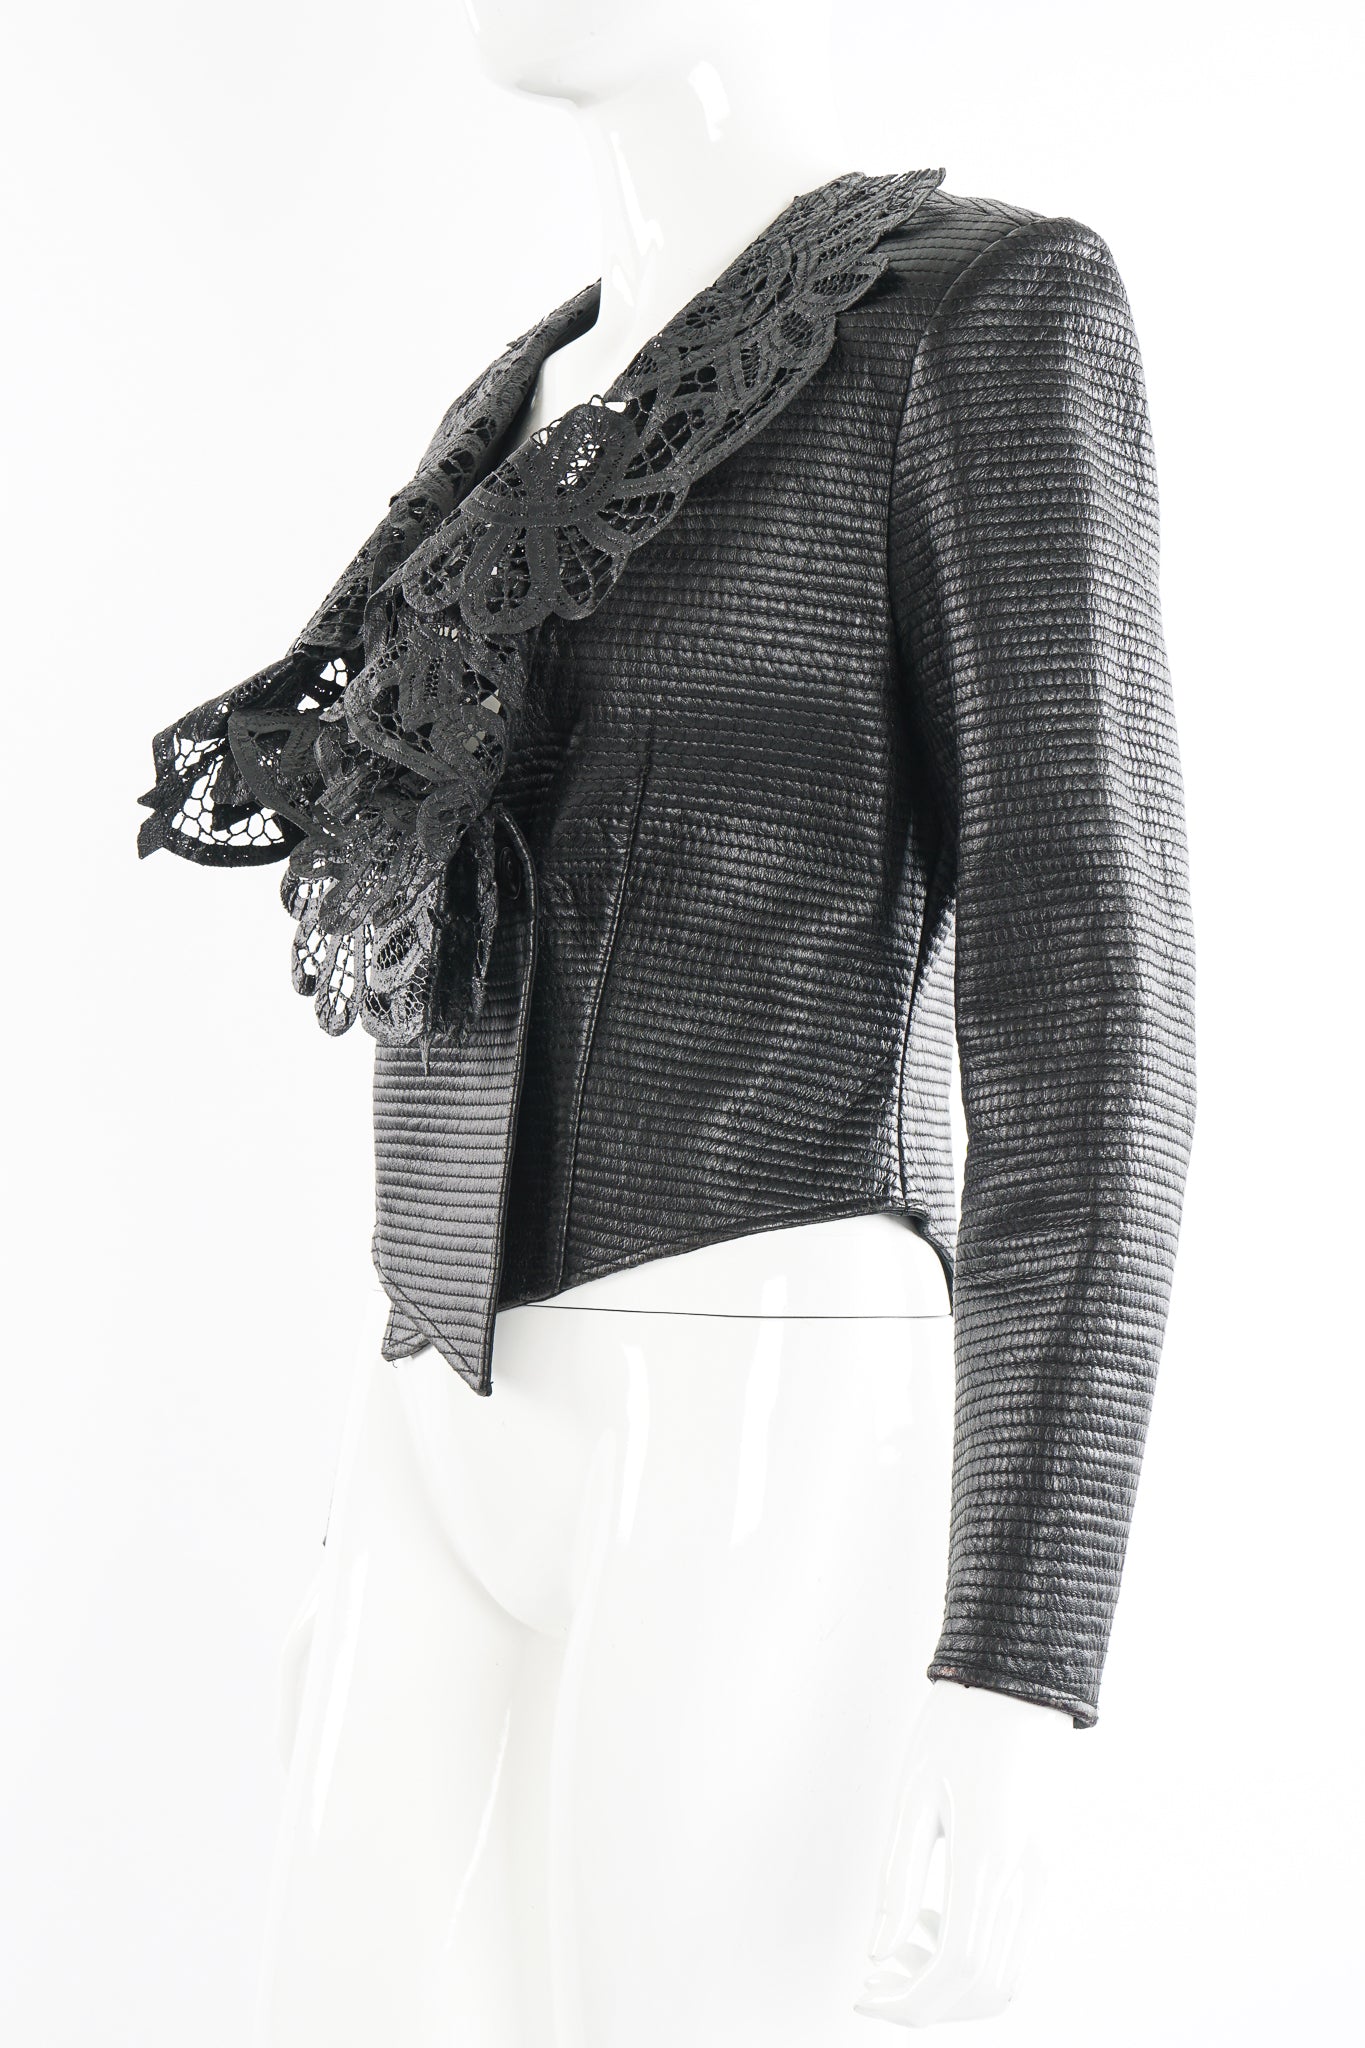 Vintage Gianfranco Ferre Quilted Leather Lace Jacket on Mannequin crop at Recess Los Angeles